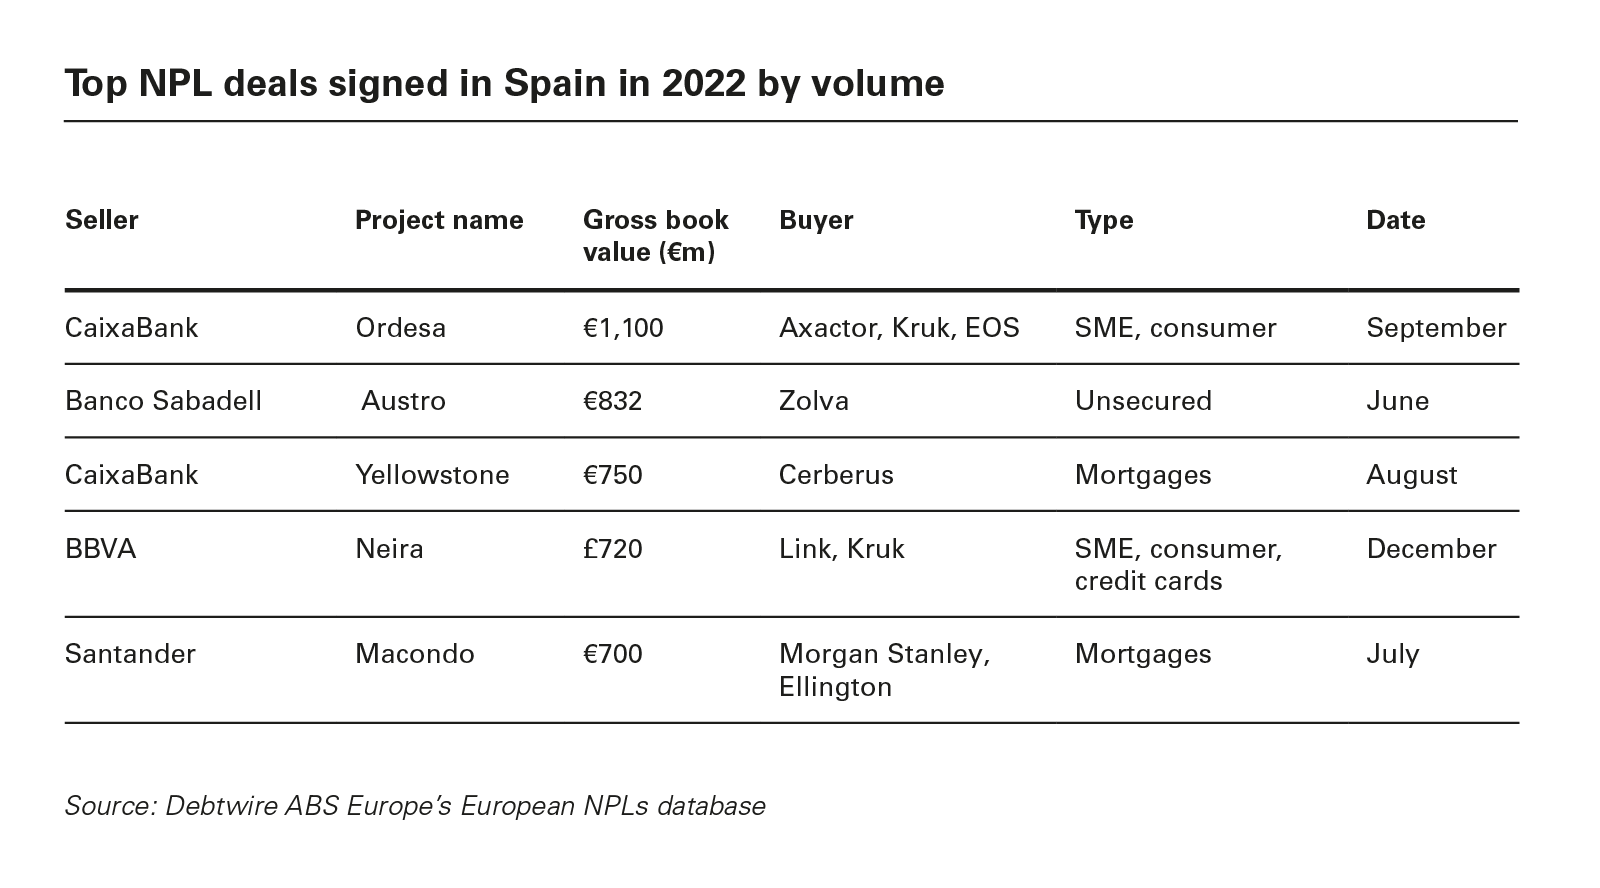 Top NPL deals signed in Spain in 2022 by volume